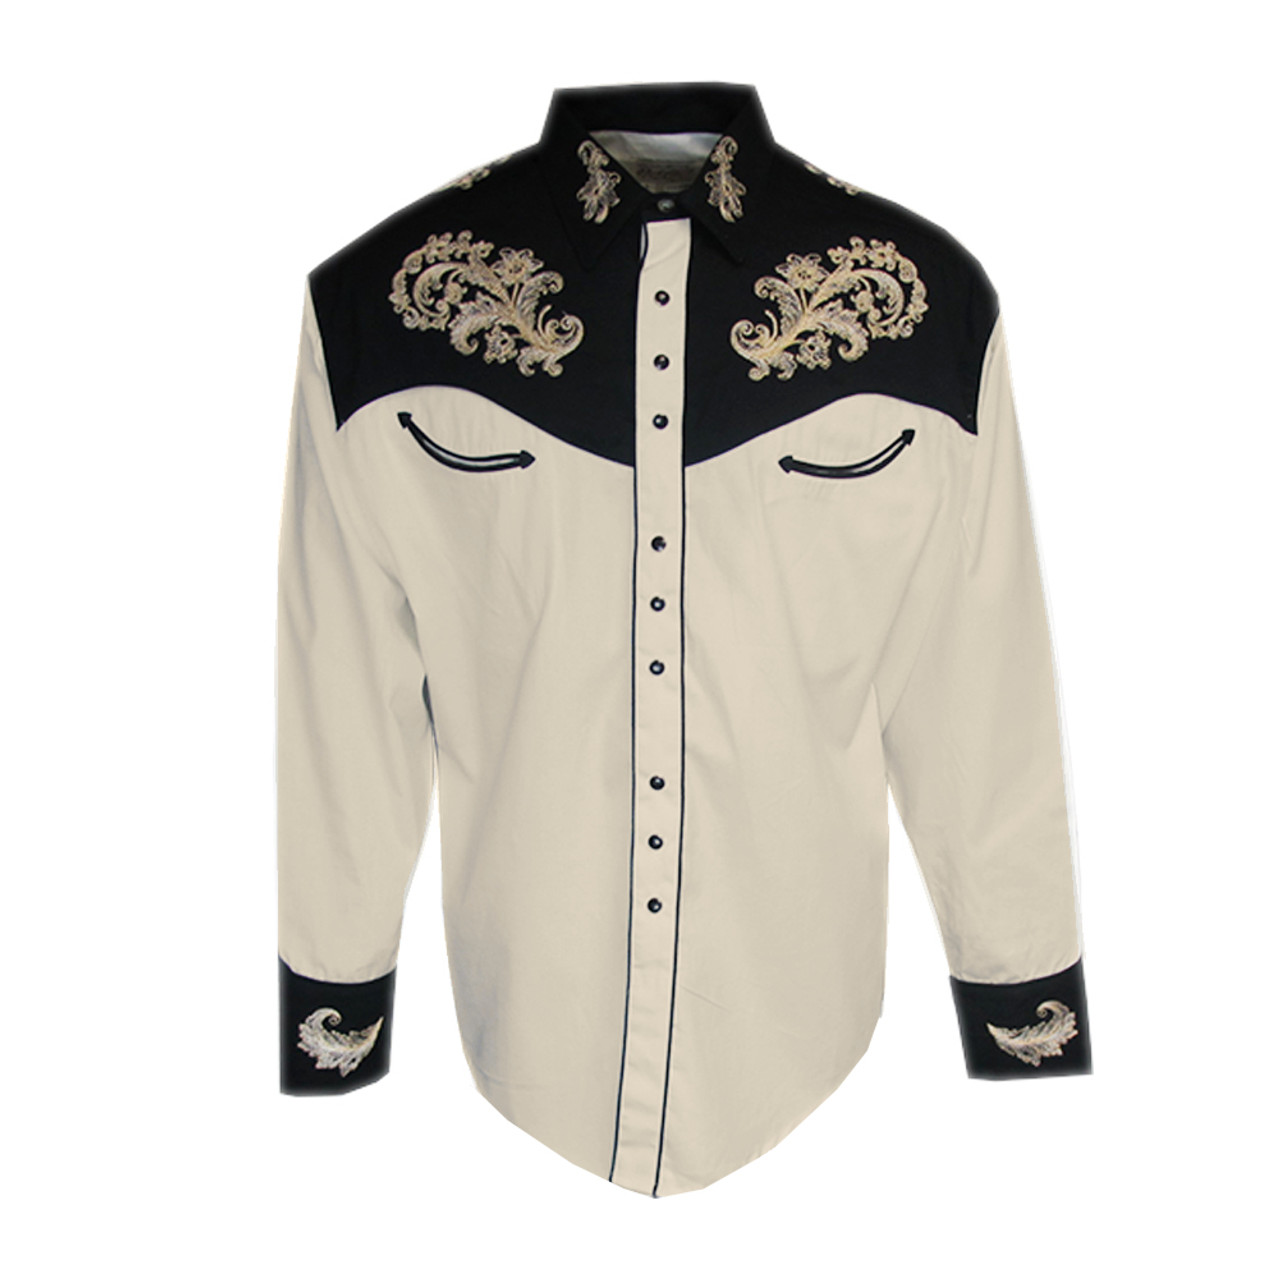 Rockmount Mens 2-Tone Floral Embroidered Cowboy Shirt - Retro Star